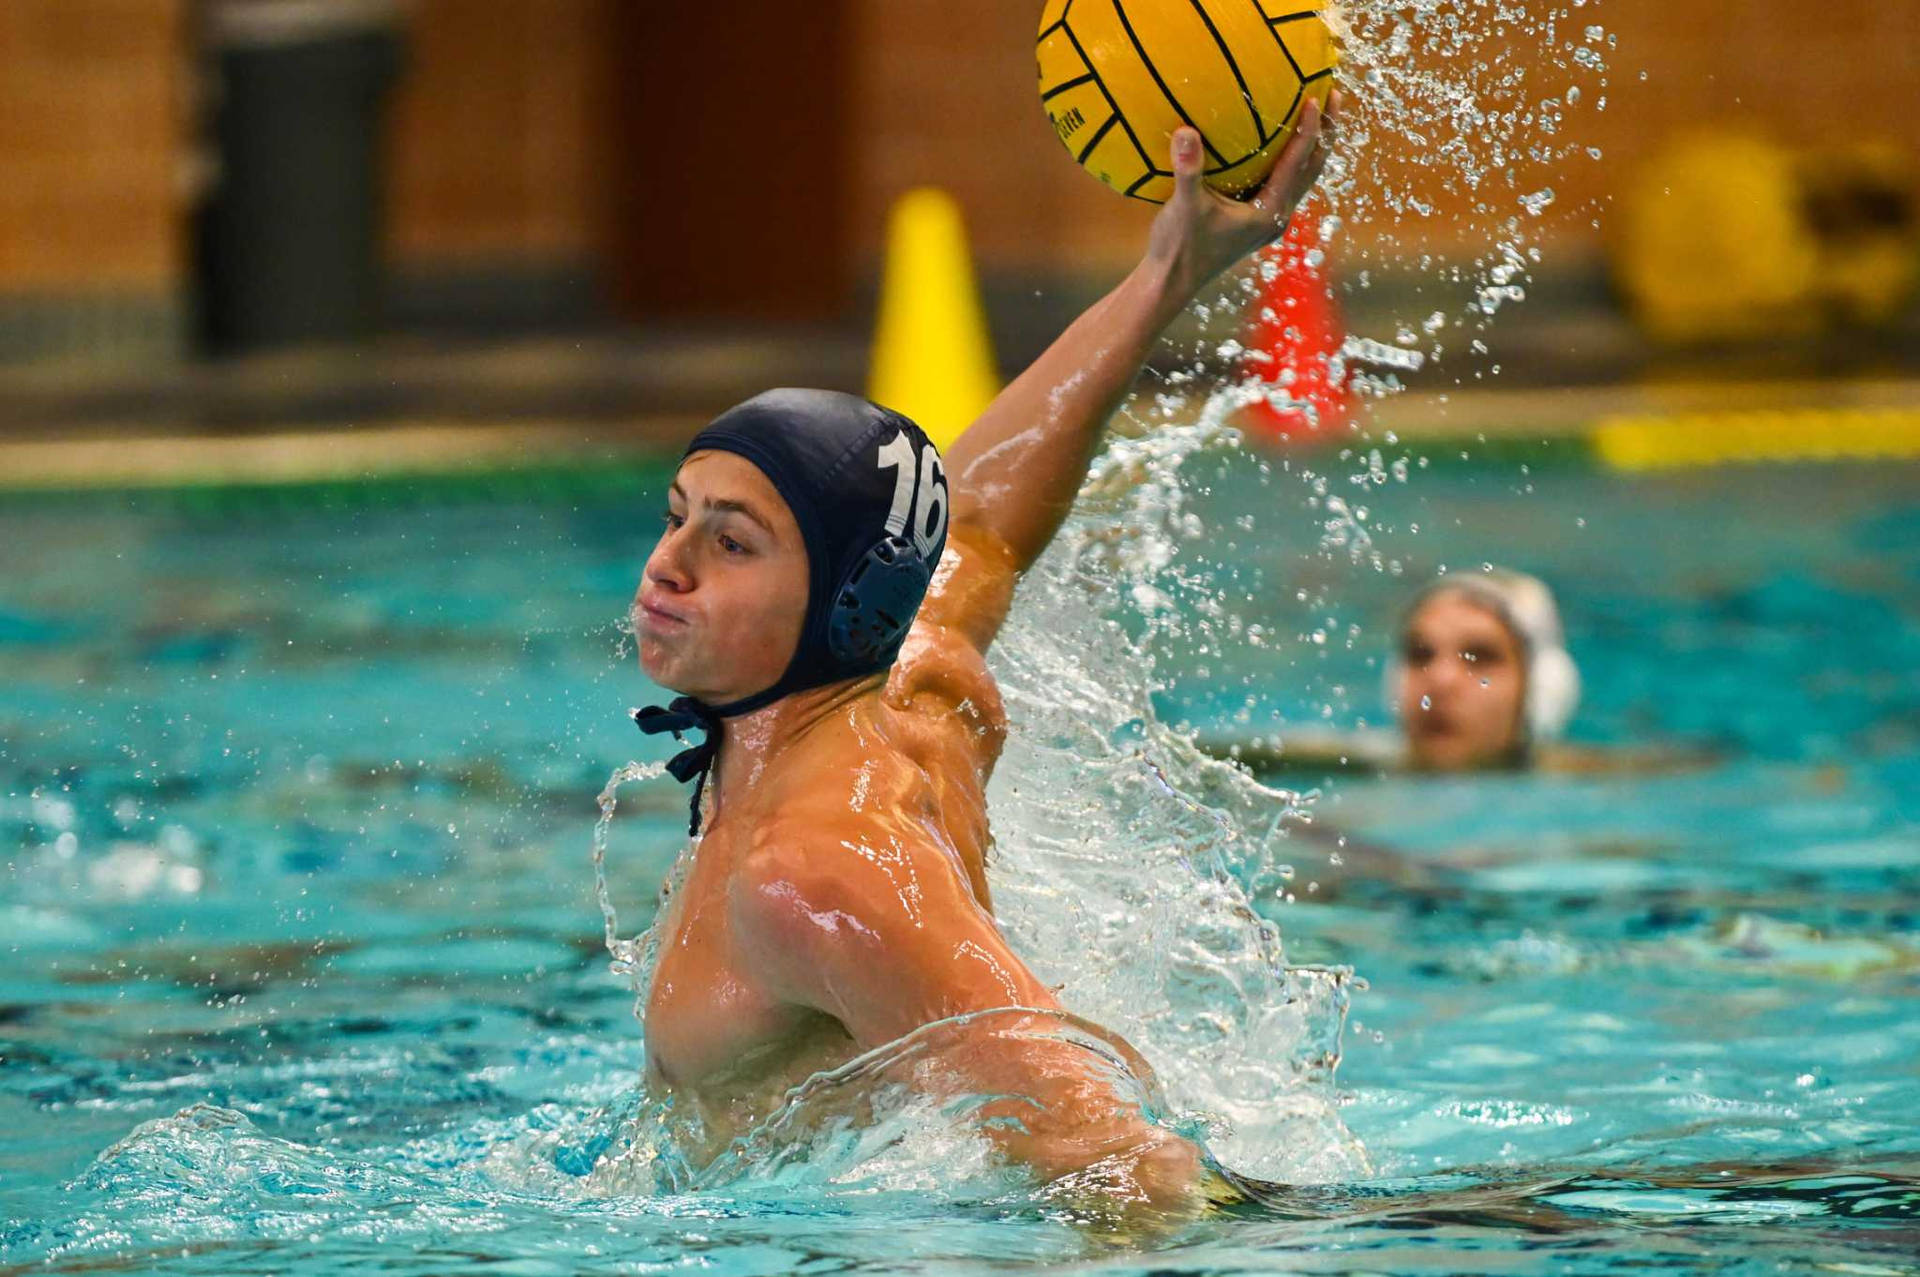 Intense Action at a Water Polo Game Wallpaper